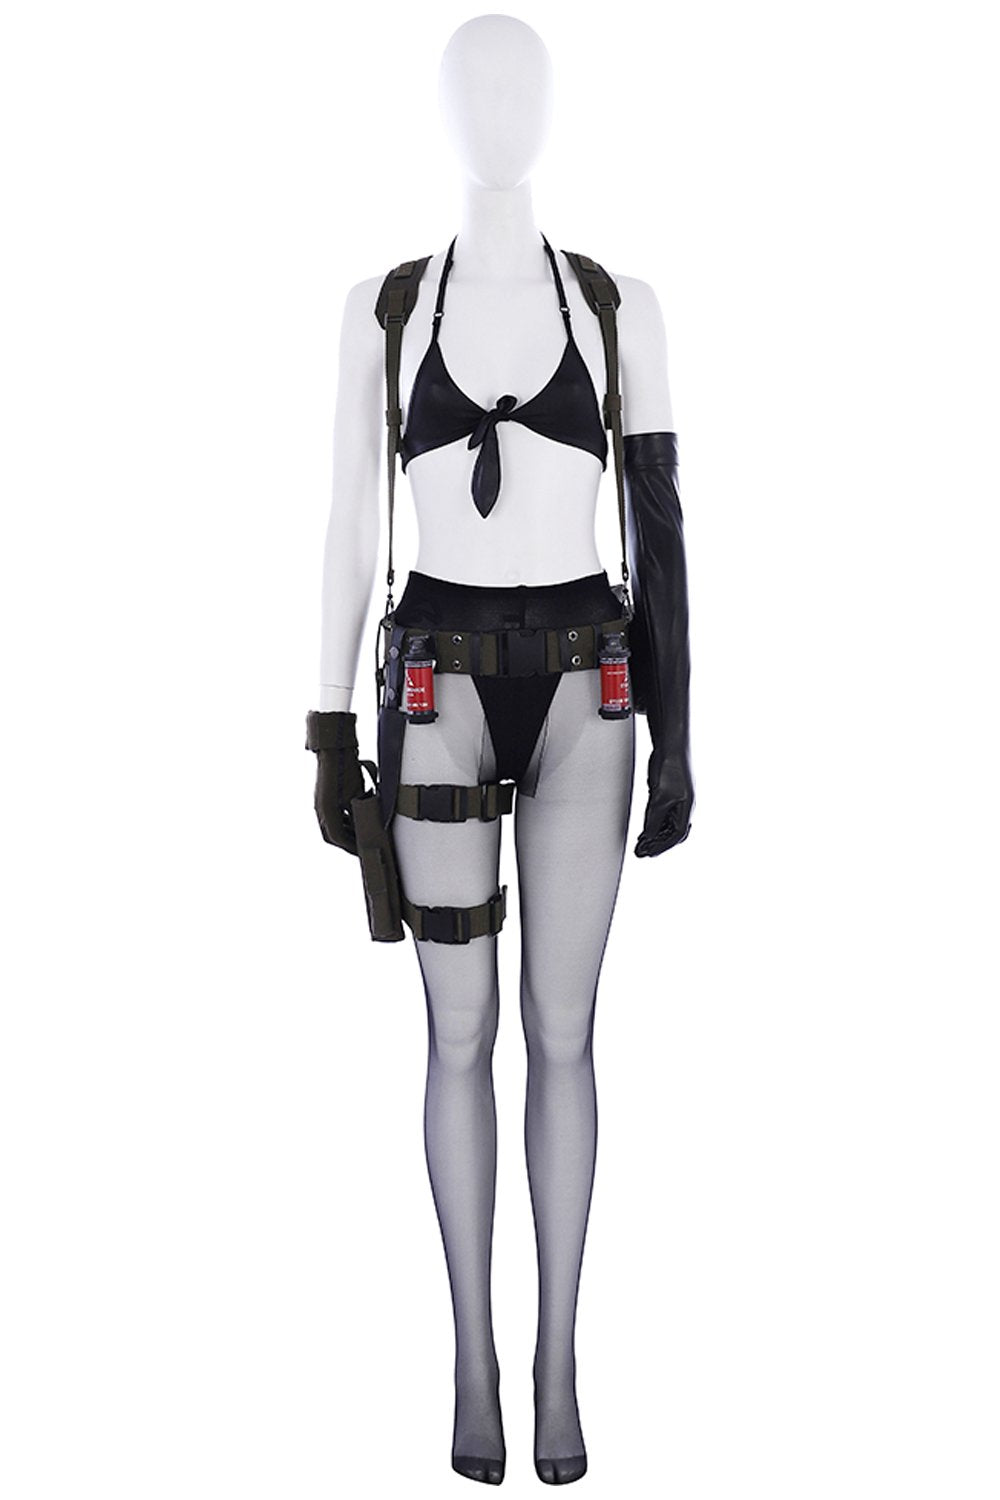 Metal Gear Solid 5 Quiet Outfit Cosplay Costume